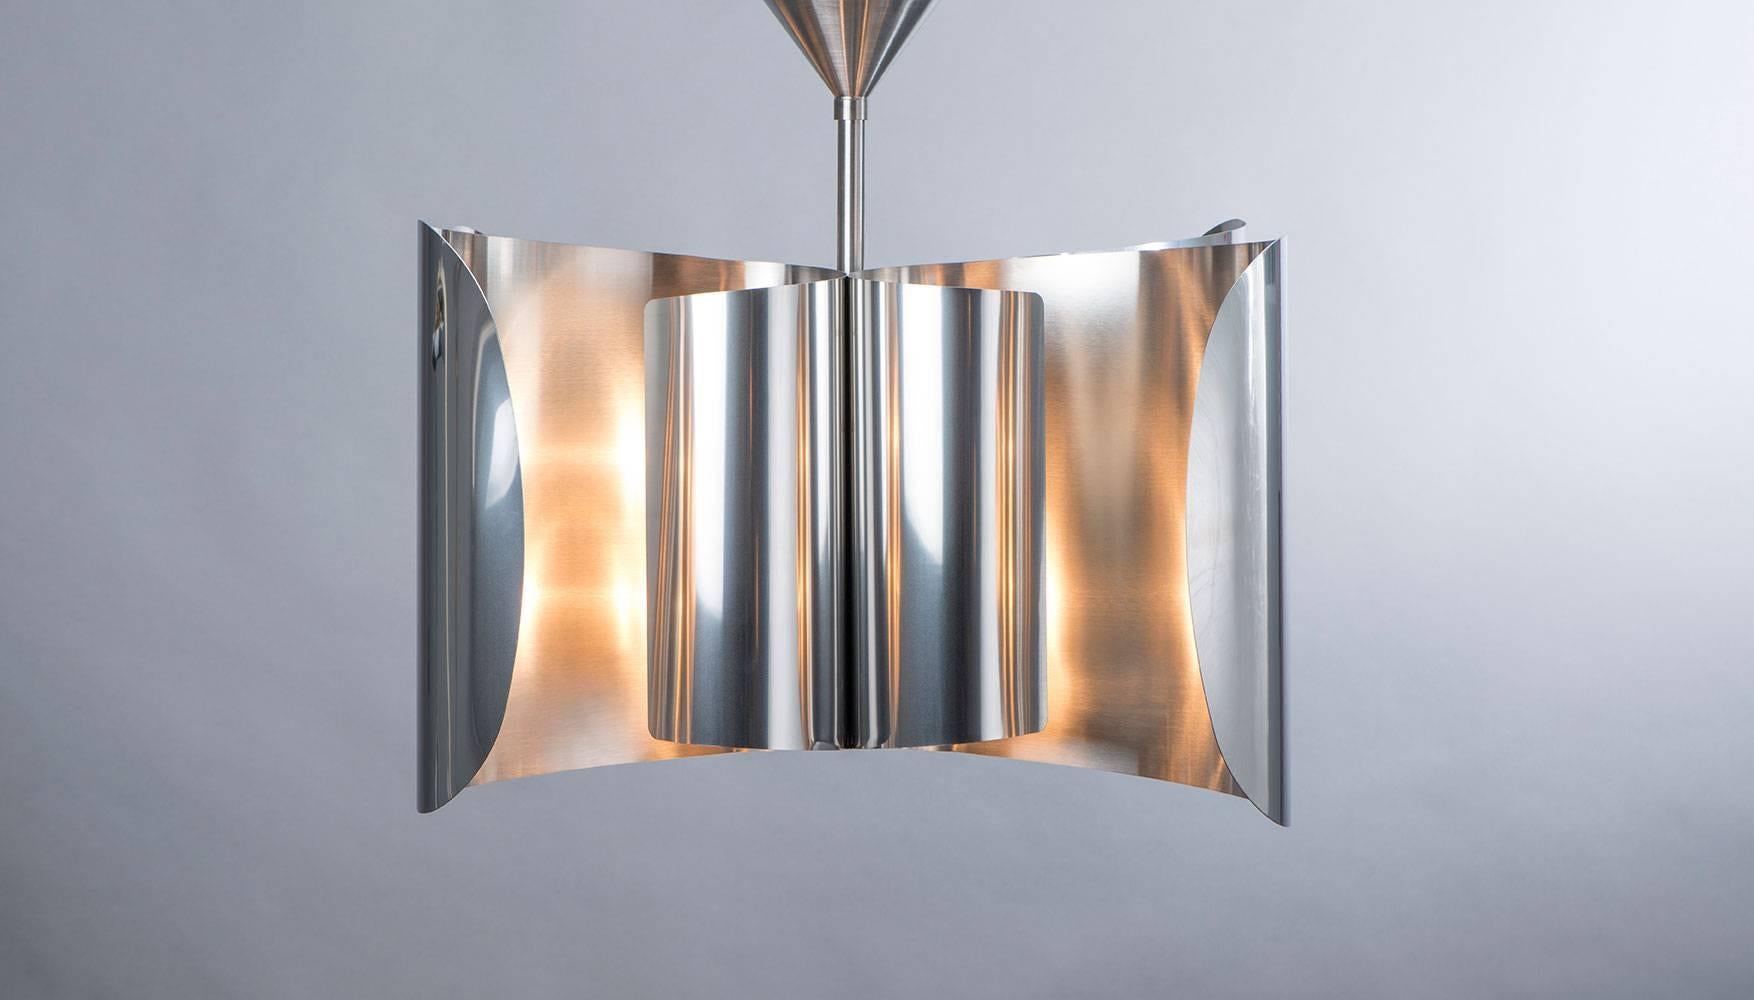 Voiles chandelier
Design Jacques Charles
Made of stainless steel
Made by Charles Paris.